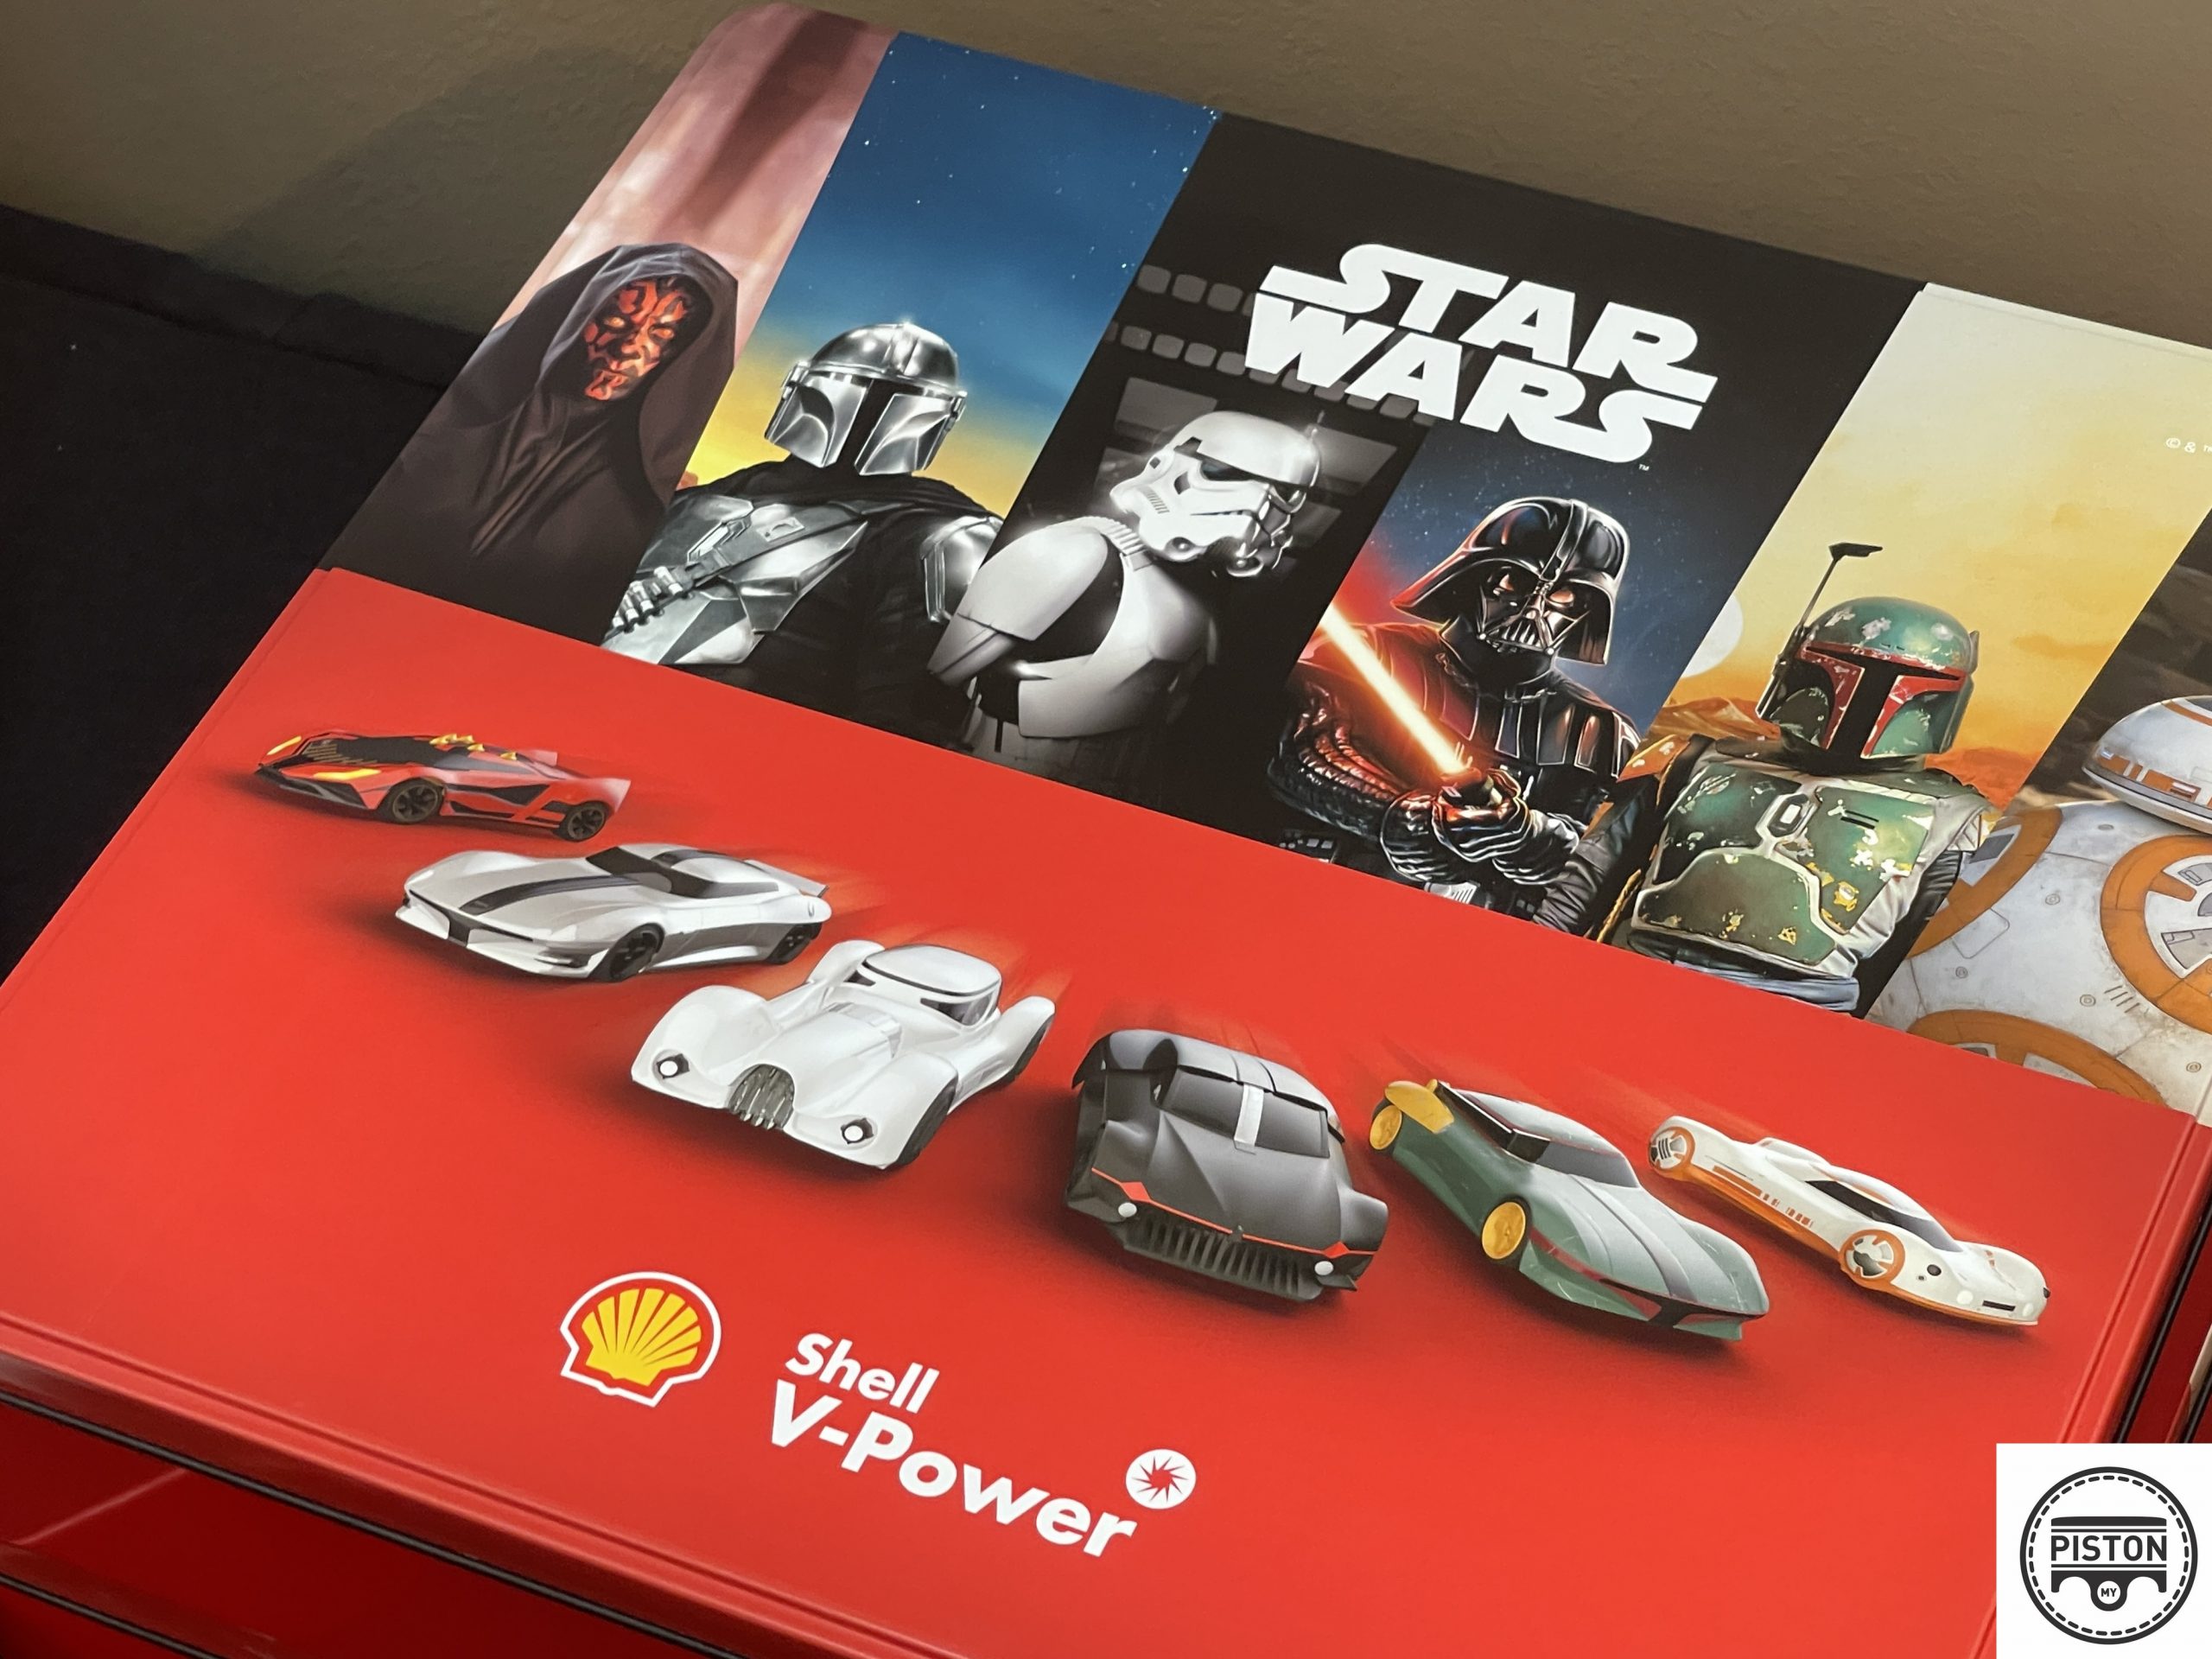 shell malaysia launches star wars rc car collection